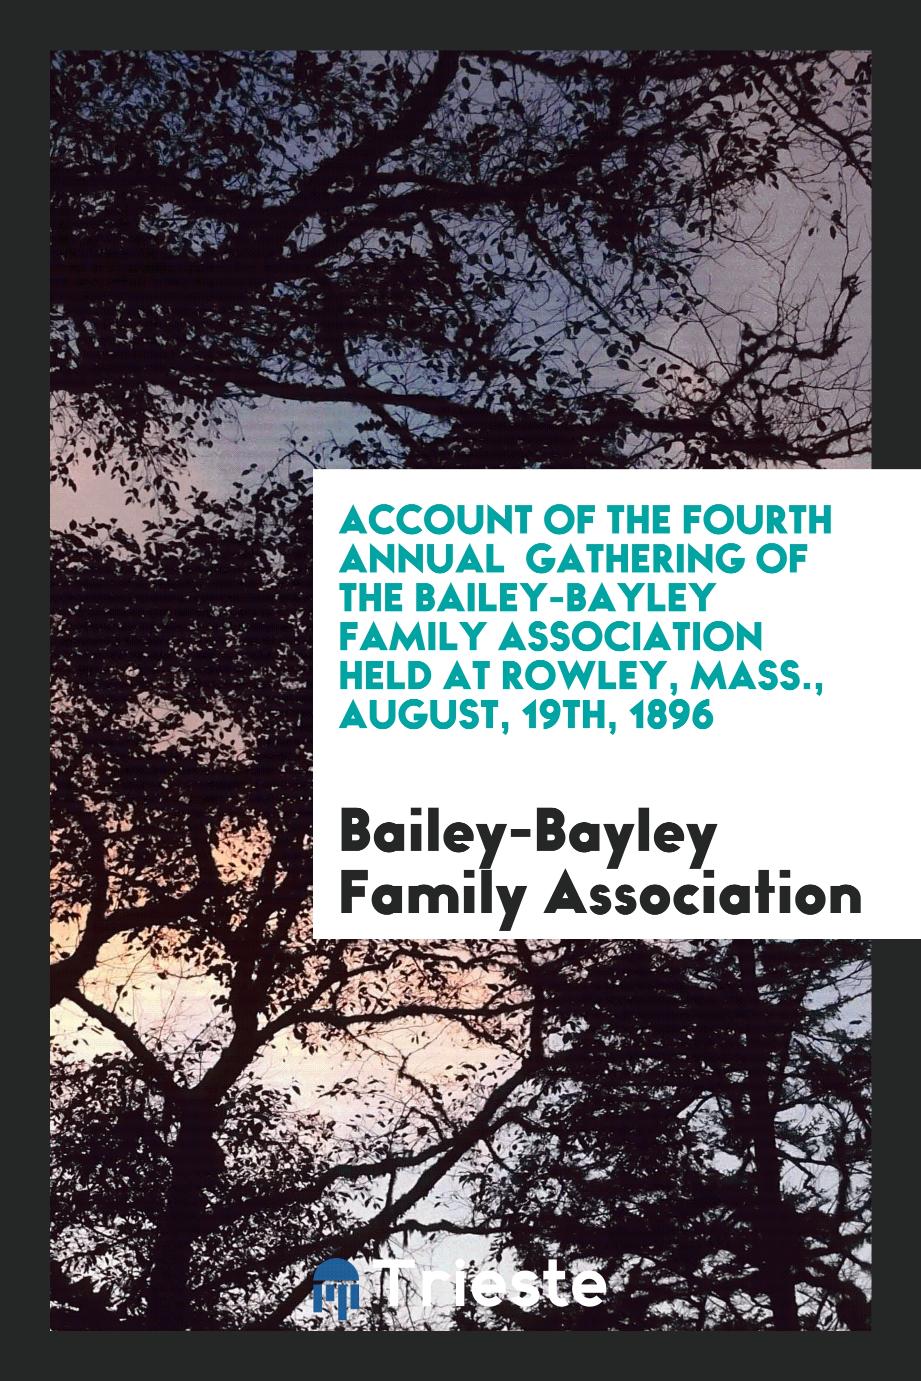 Account of the fourth annual gathering of the Bailey-Bayley Family Association held at Rowley, Mass., August, 19th, 1896